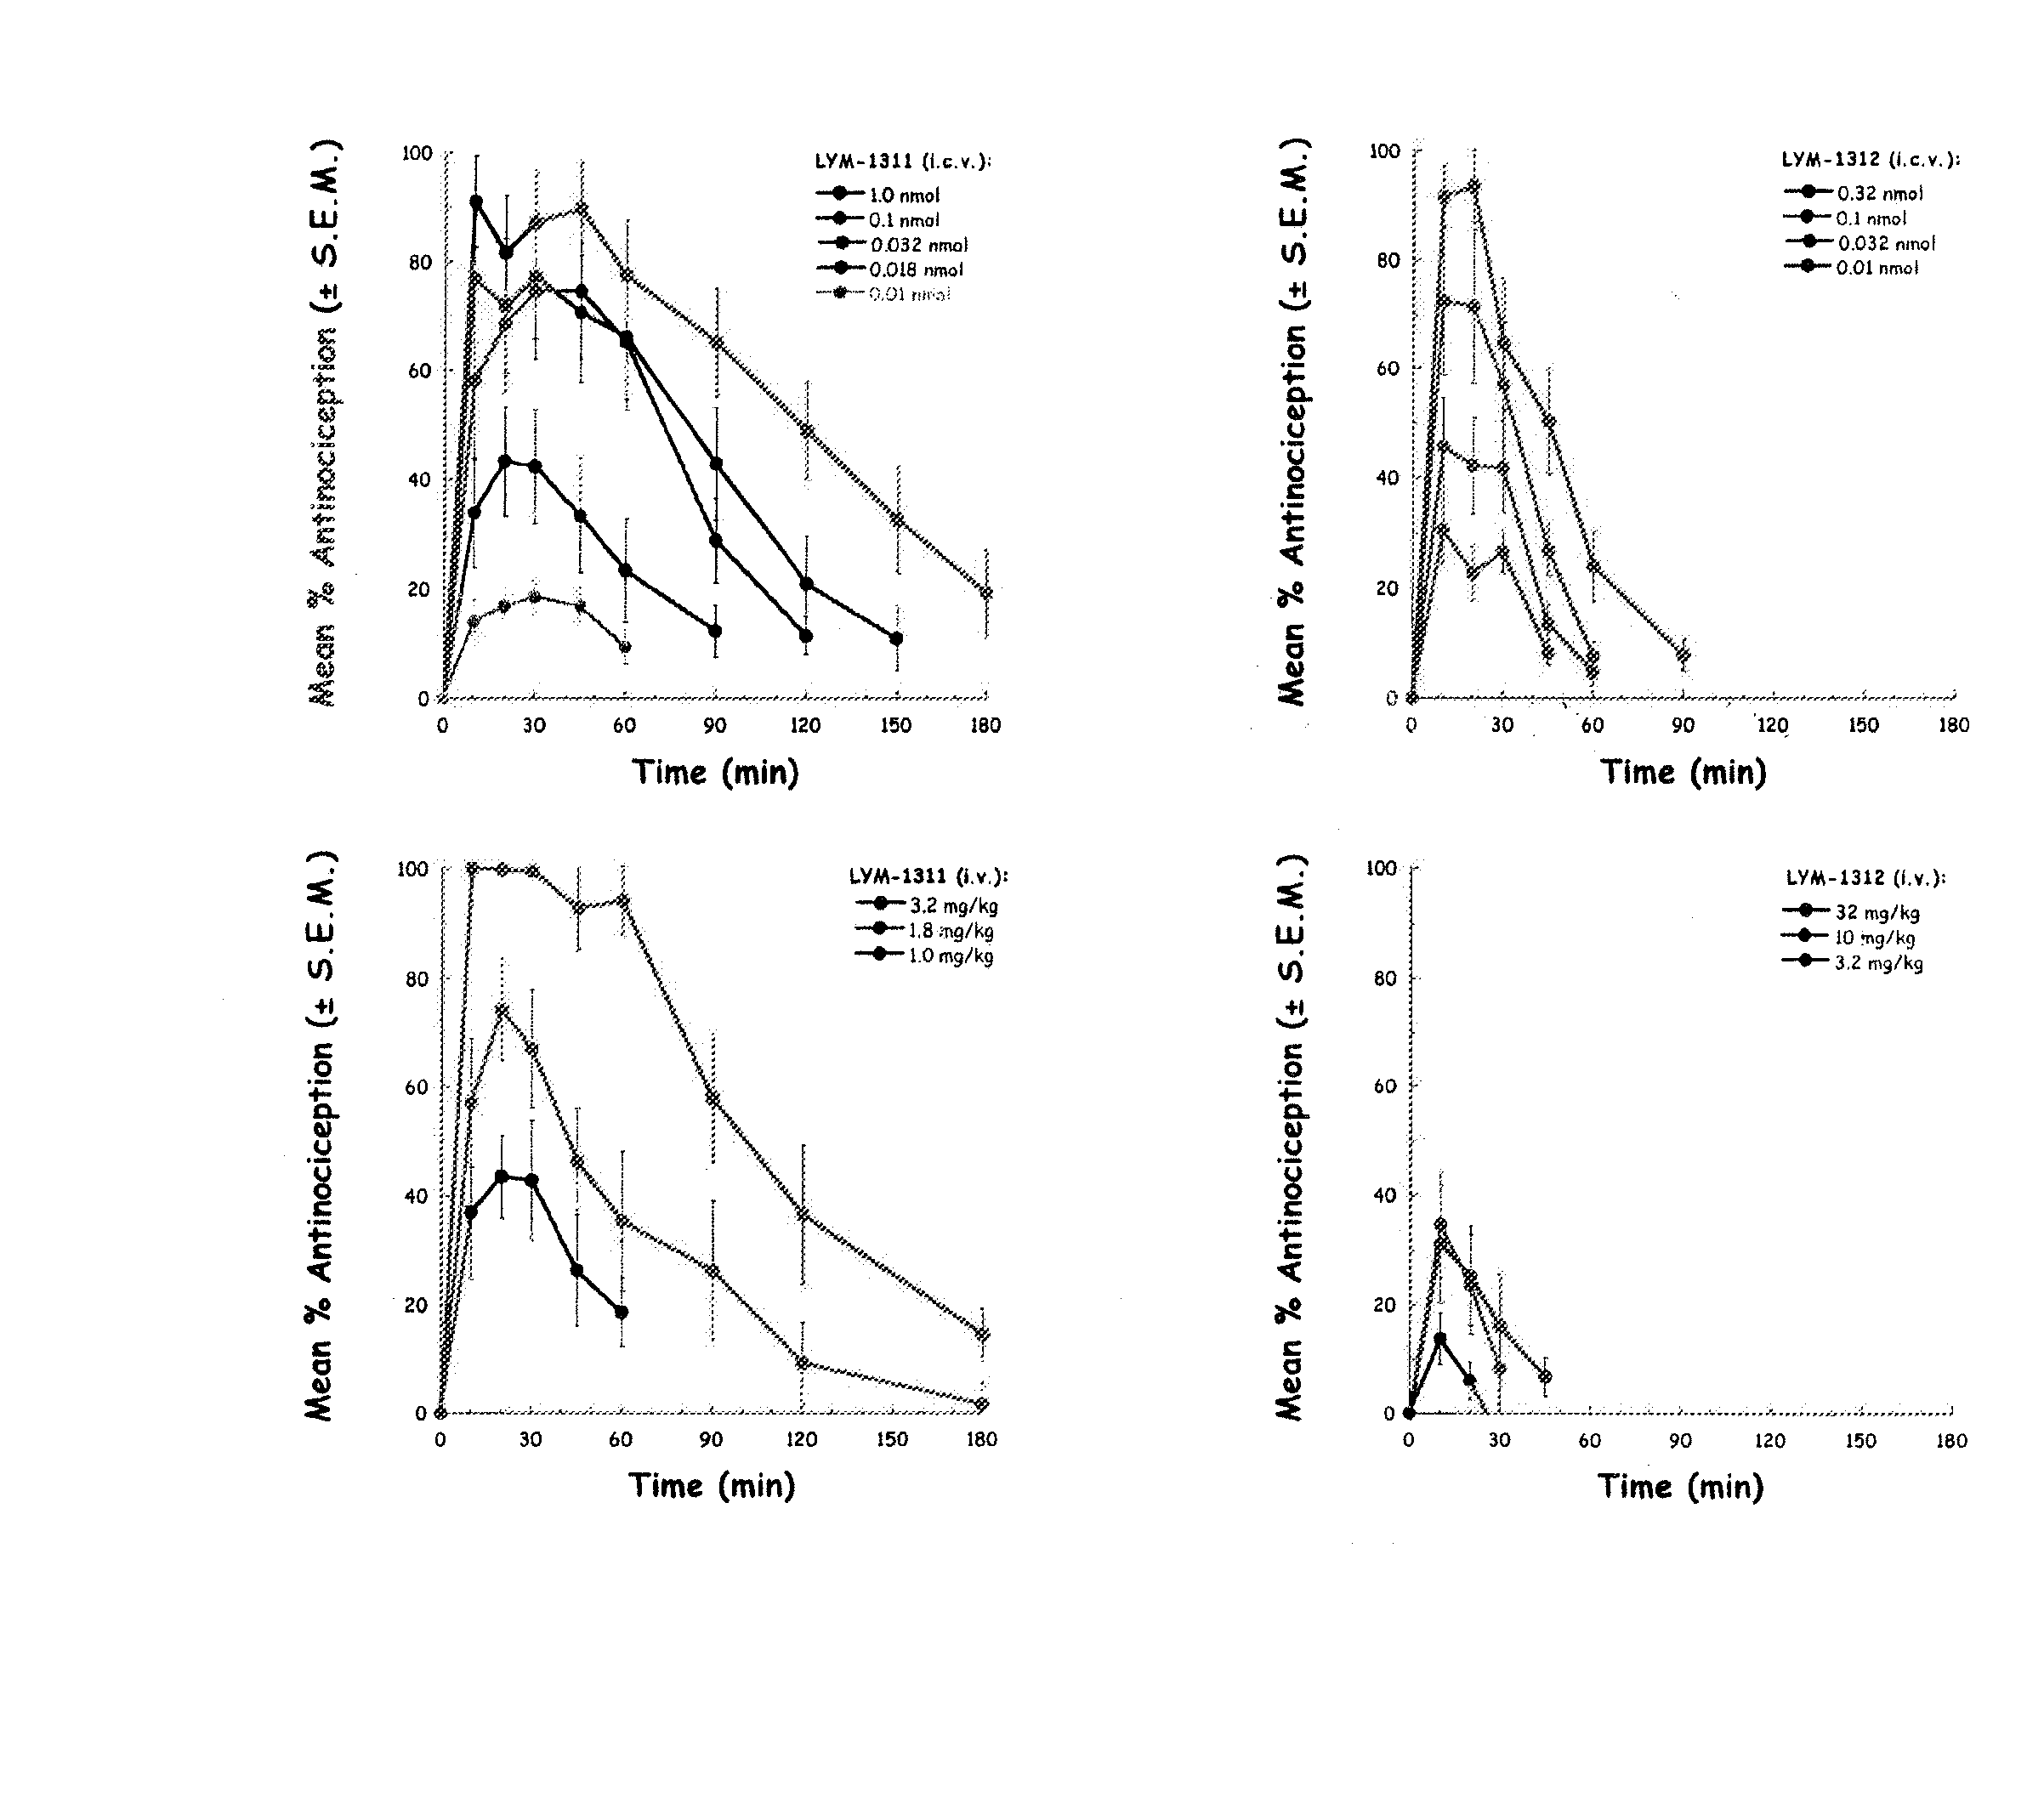 Enkepahlin analogs with improved bioavailability